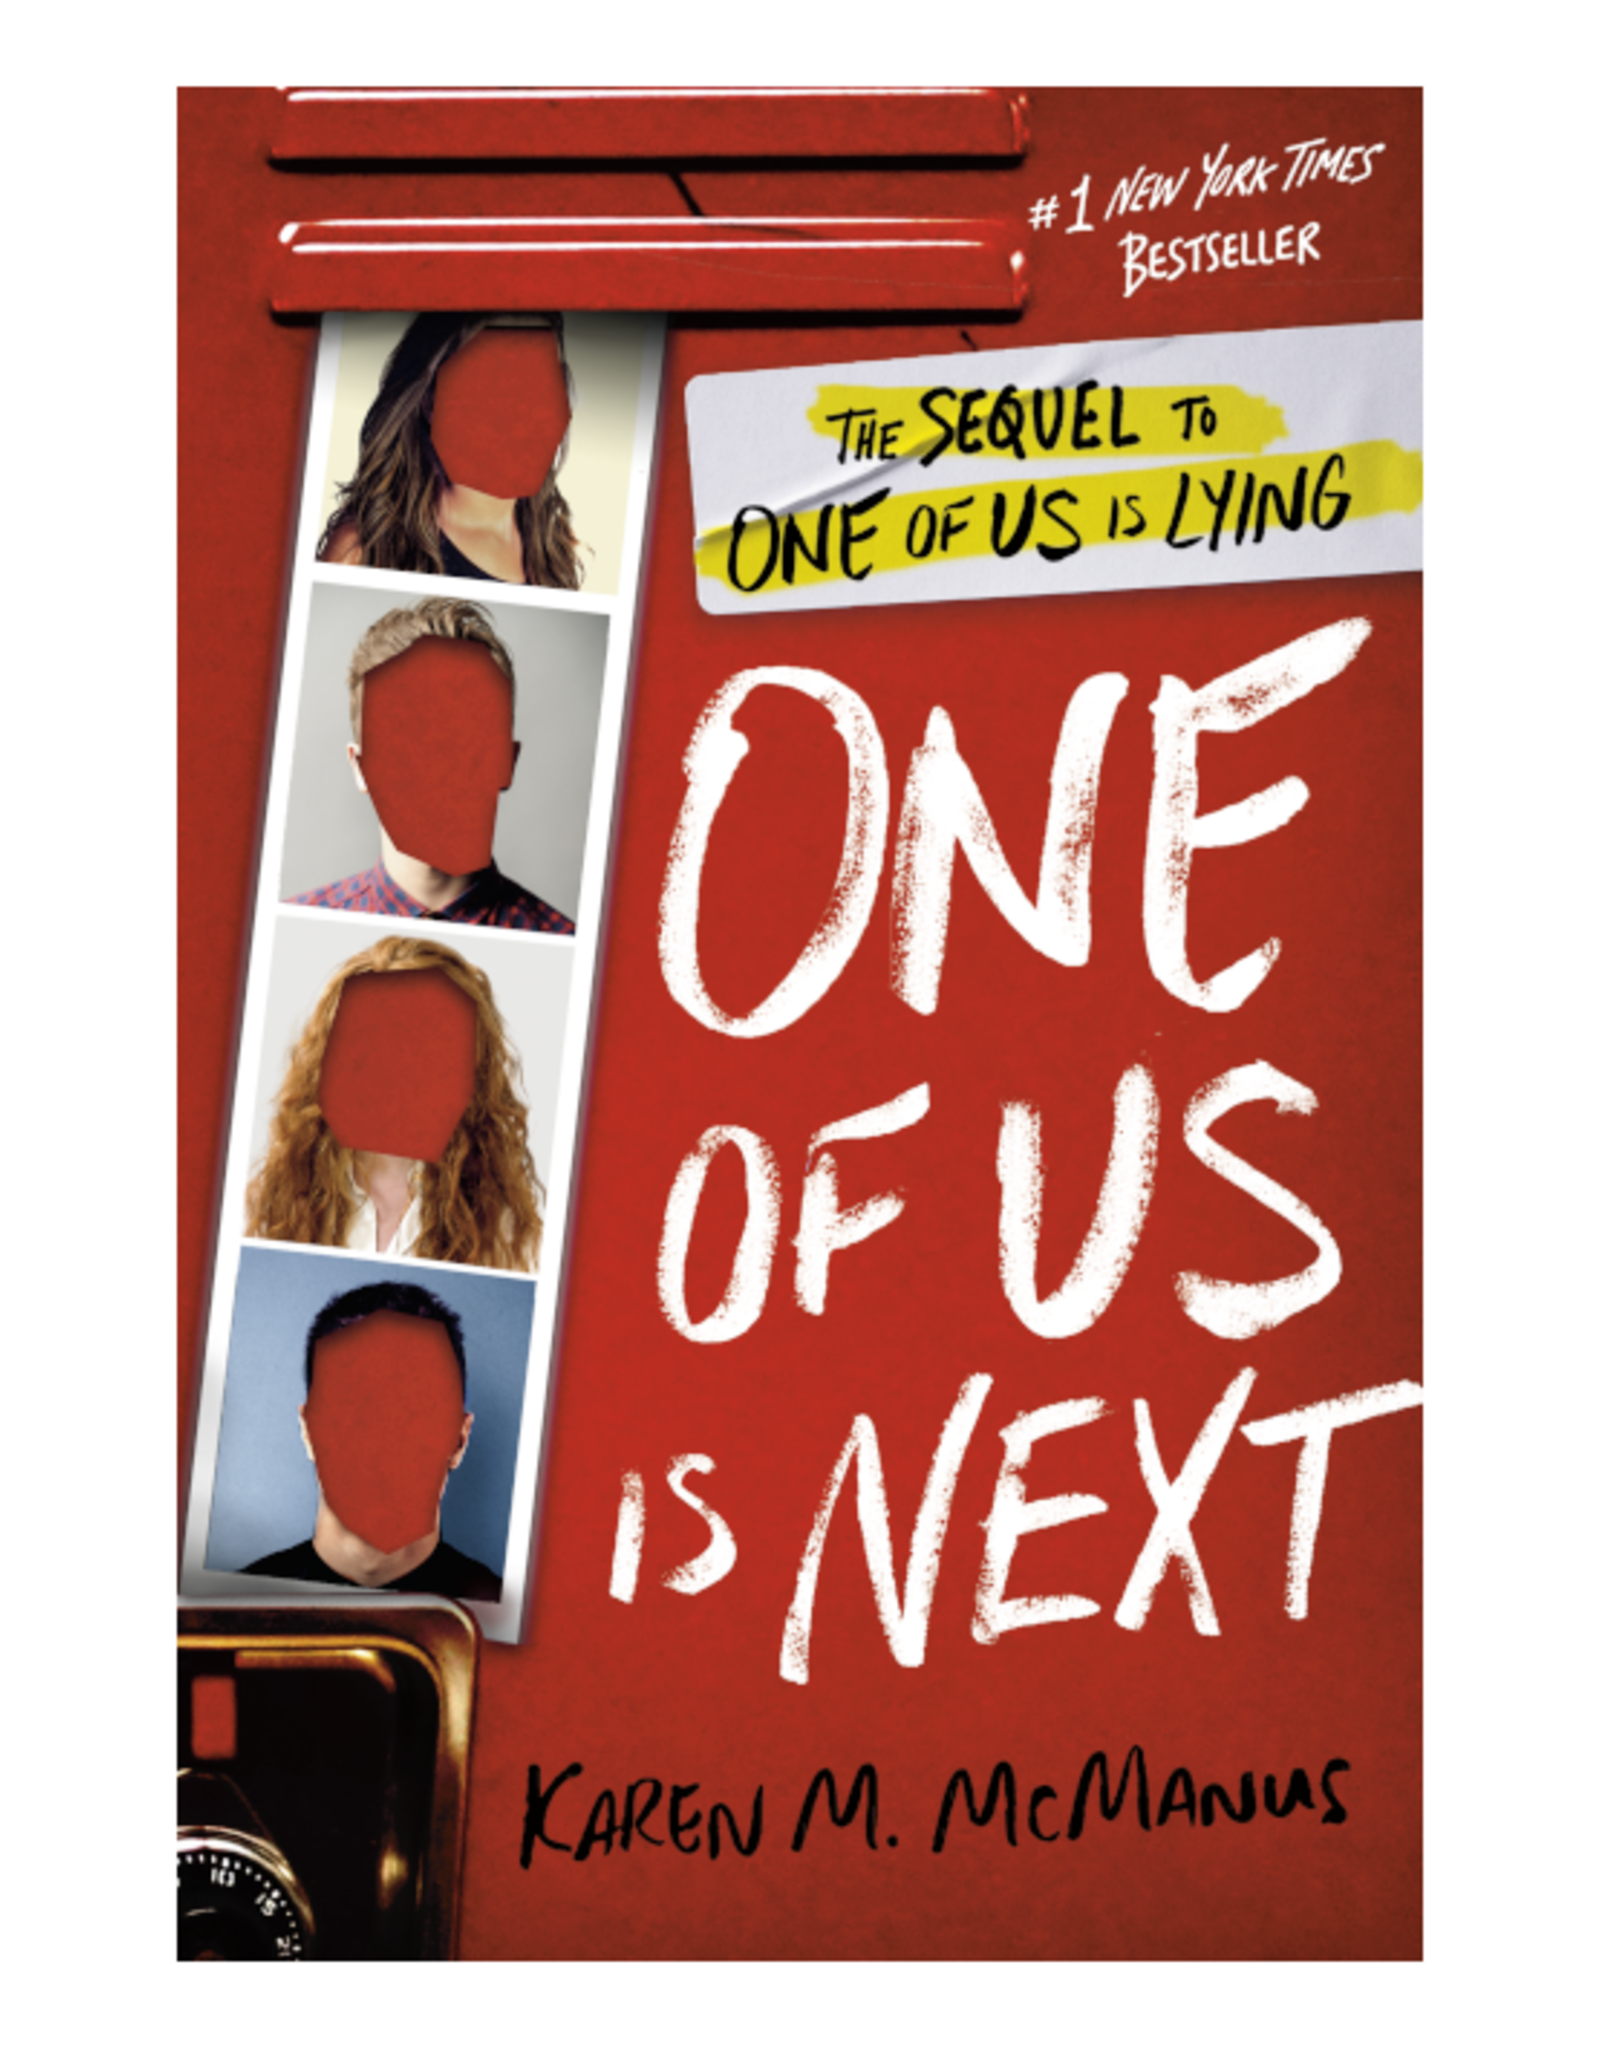 Book - One Of Us Is Next